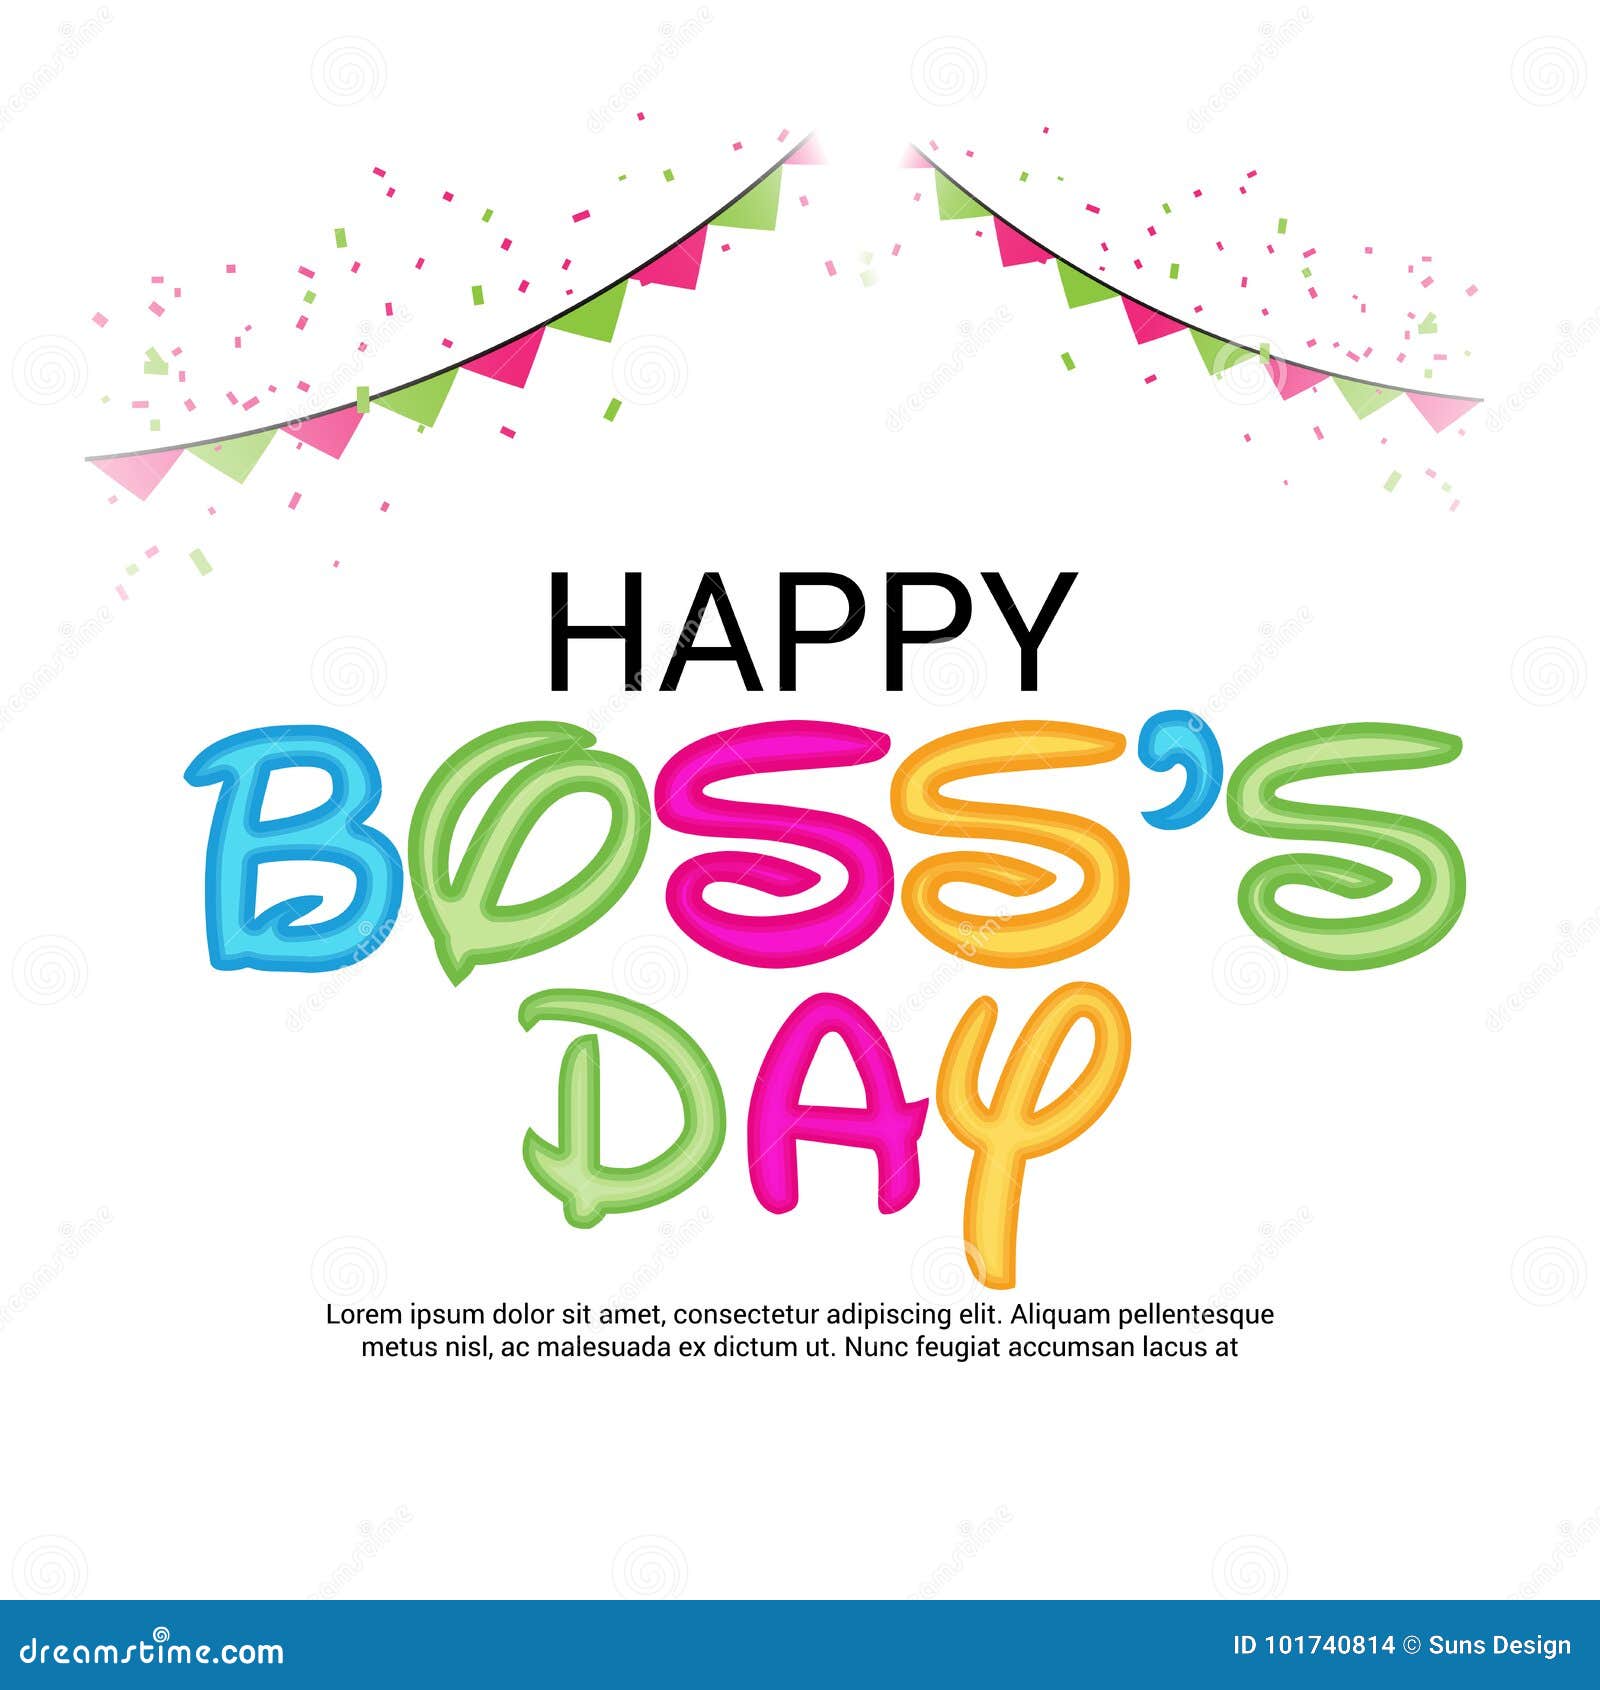 Happy Boss's Day Printable Signs